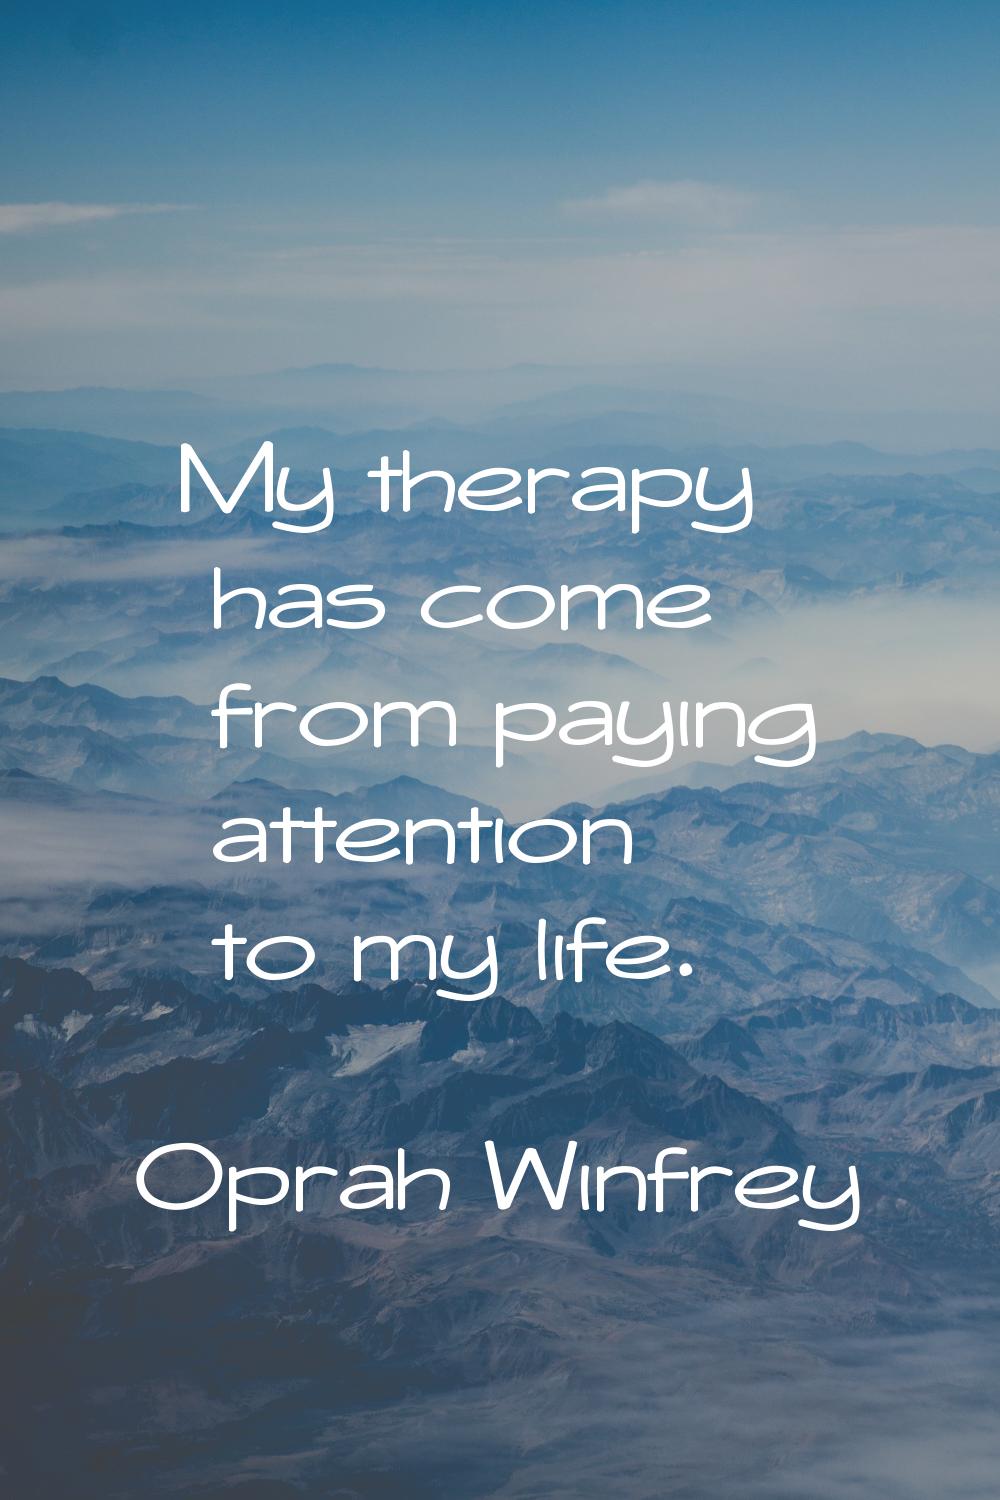 My therapy has come from paying attention to my life.